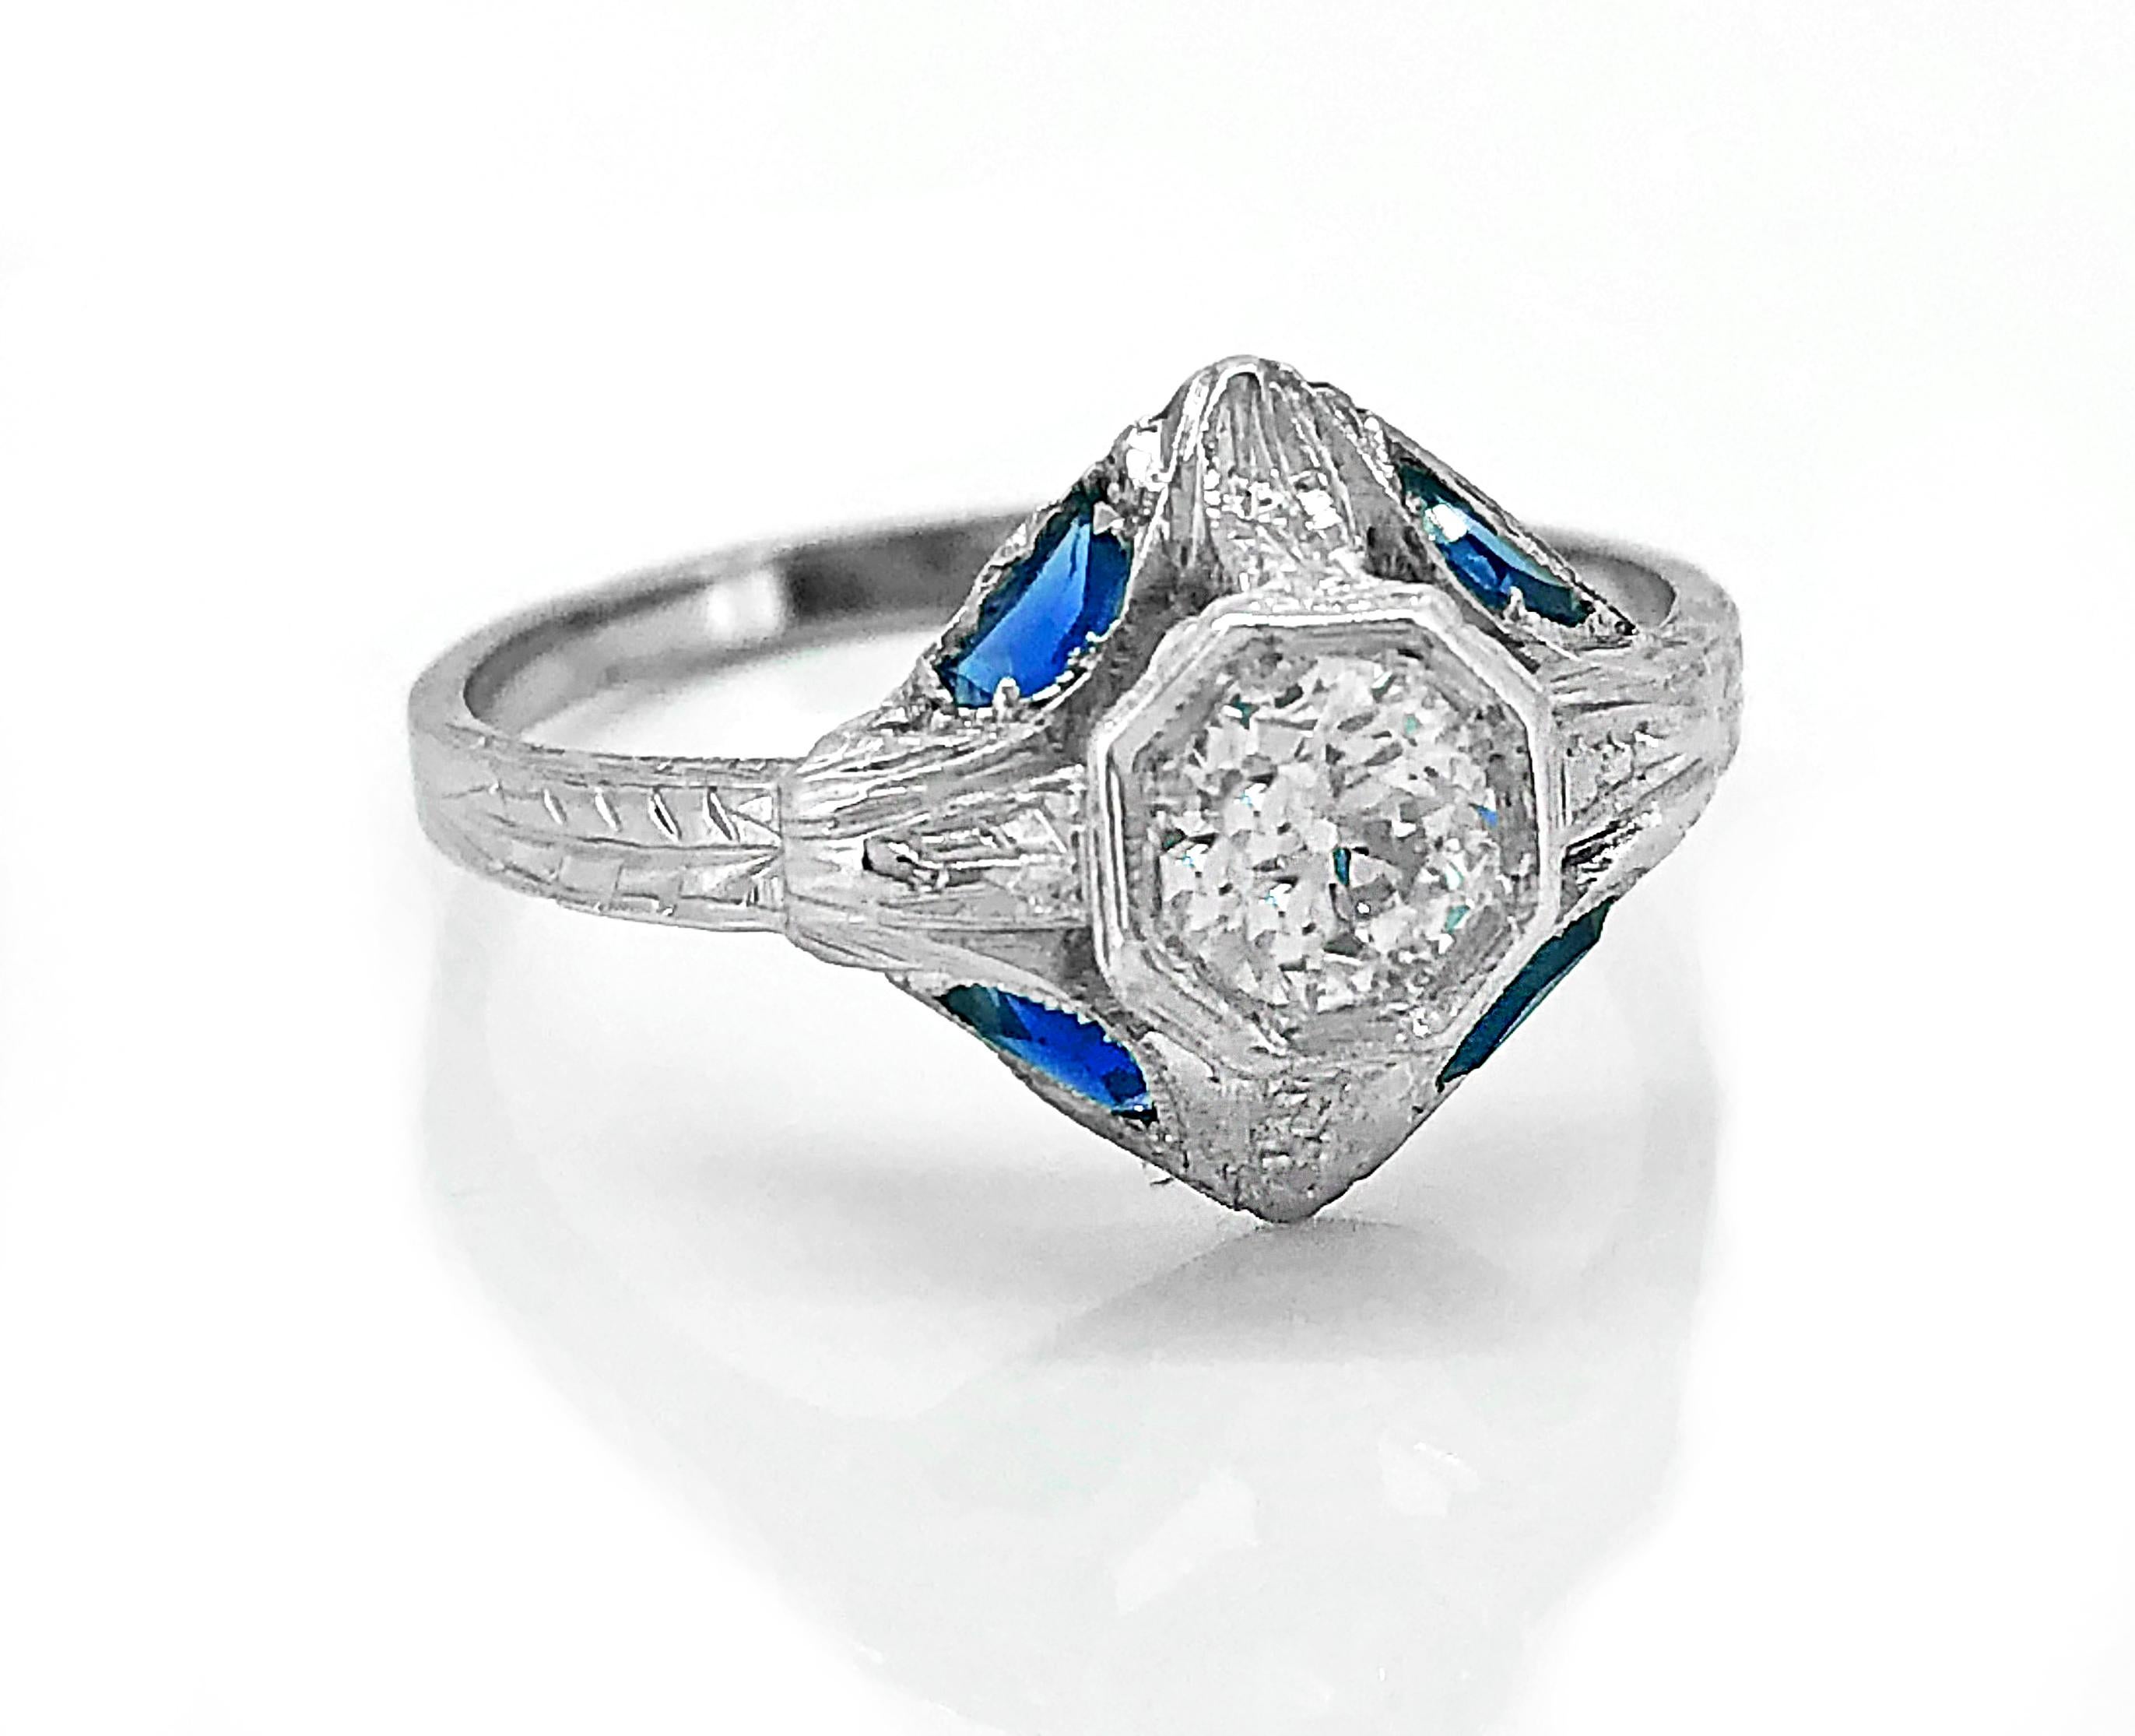 The .43ct. diamond is slightly elevated above the base of the Art Deco Antique engagement ring which is accented with four beautiful lab created sapphires. The sapphires are lab created which was started during the Art Deco time period. The sapphire